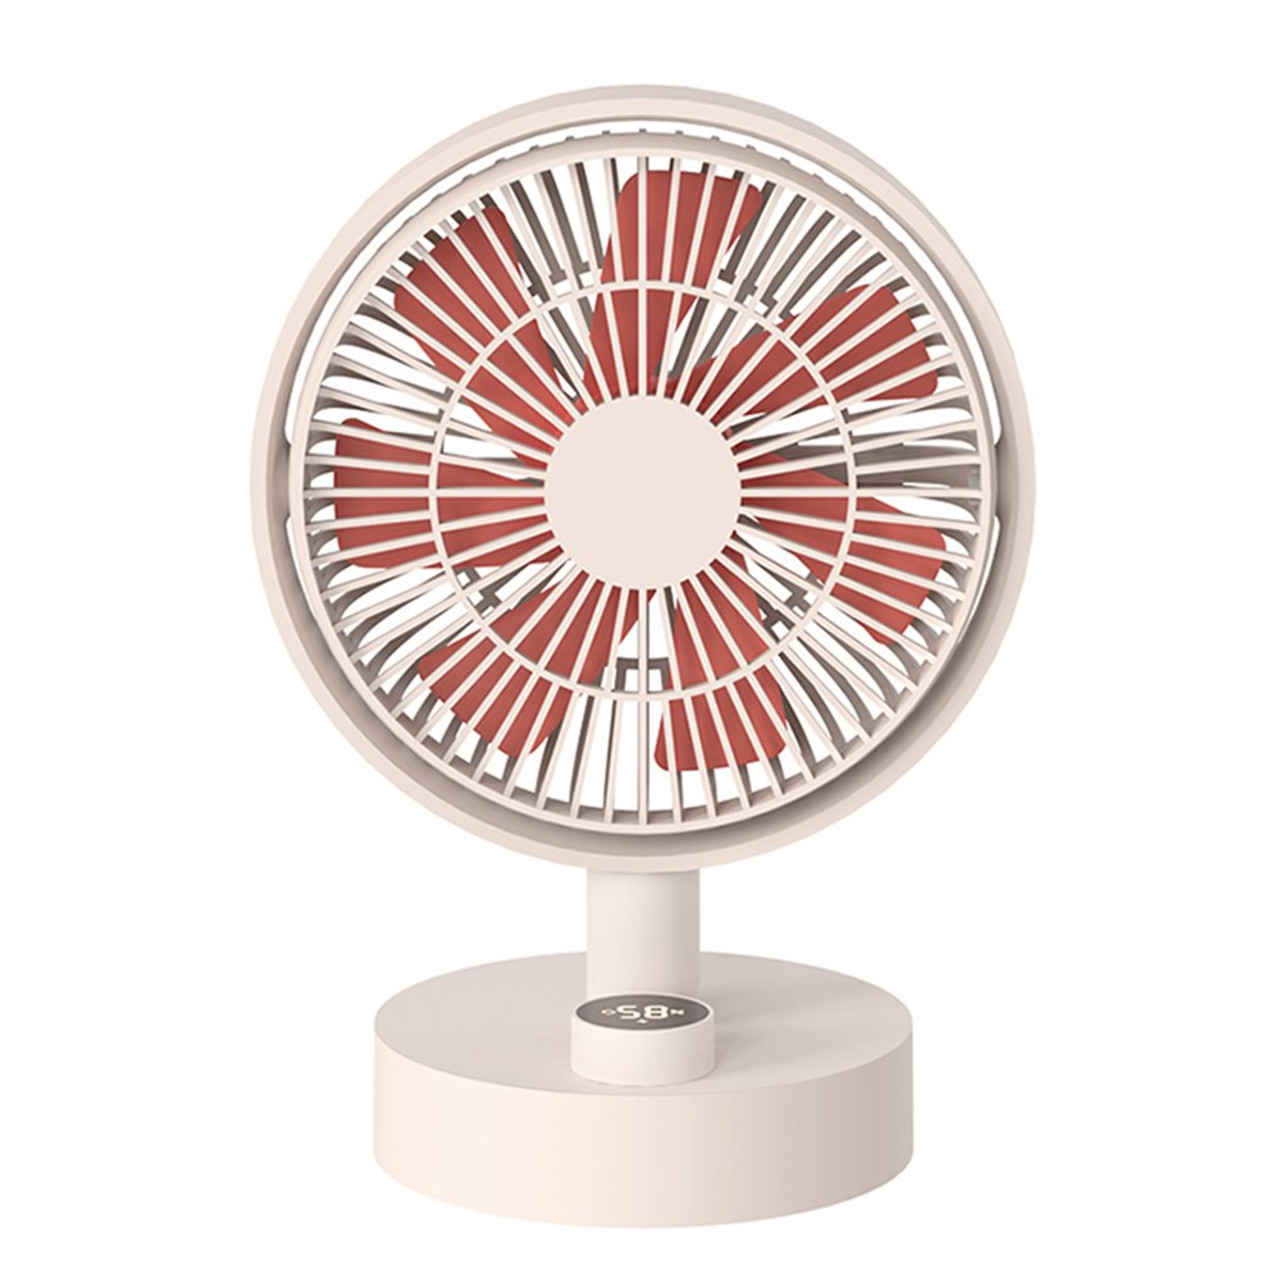 XIAOMI YOUPIN SOTHING S2 DSHJ-S-2102 Portable Rotating Desktop Fan  Adjustable Rechargeable Low Noise Mini Fan for Office/Home - Apricot -  Snatcher